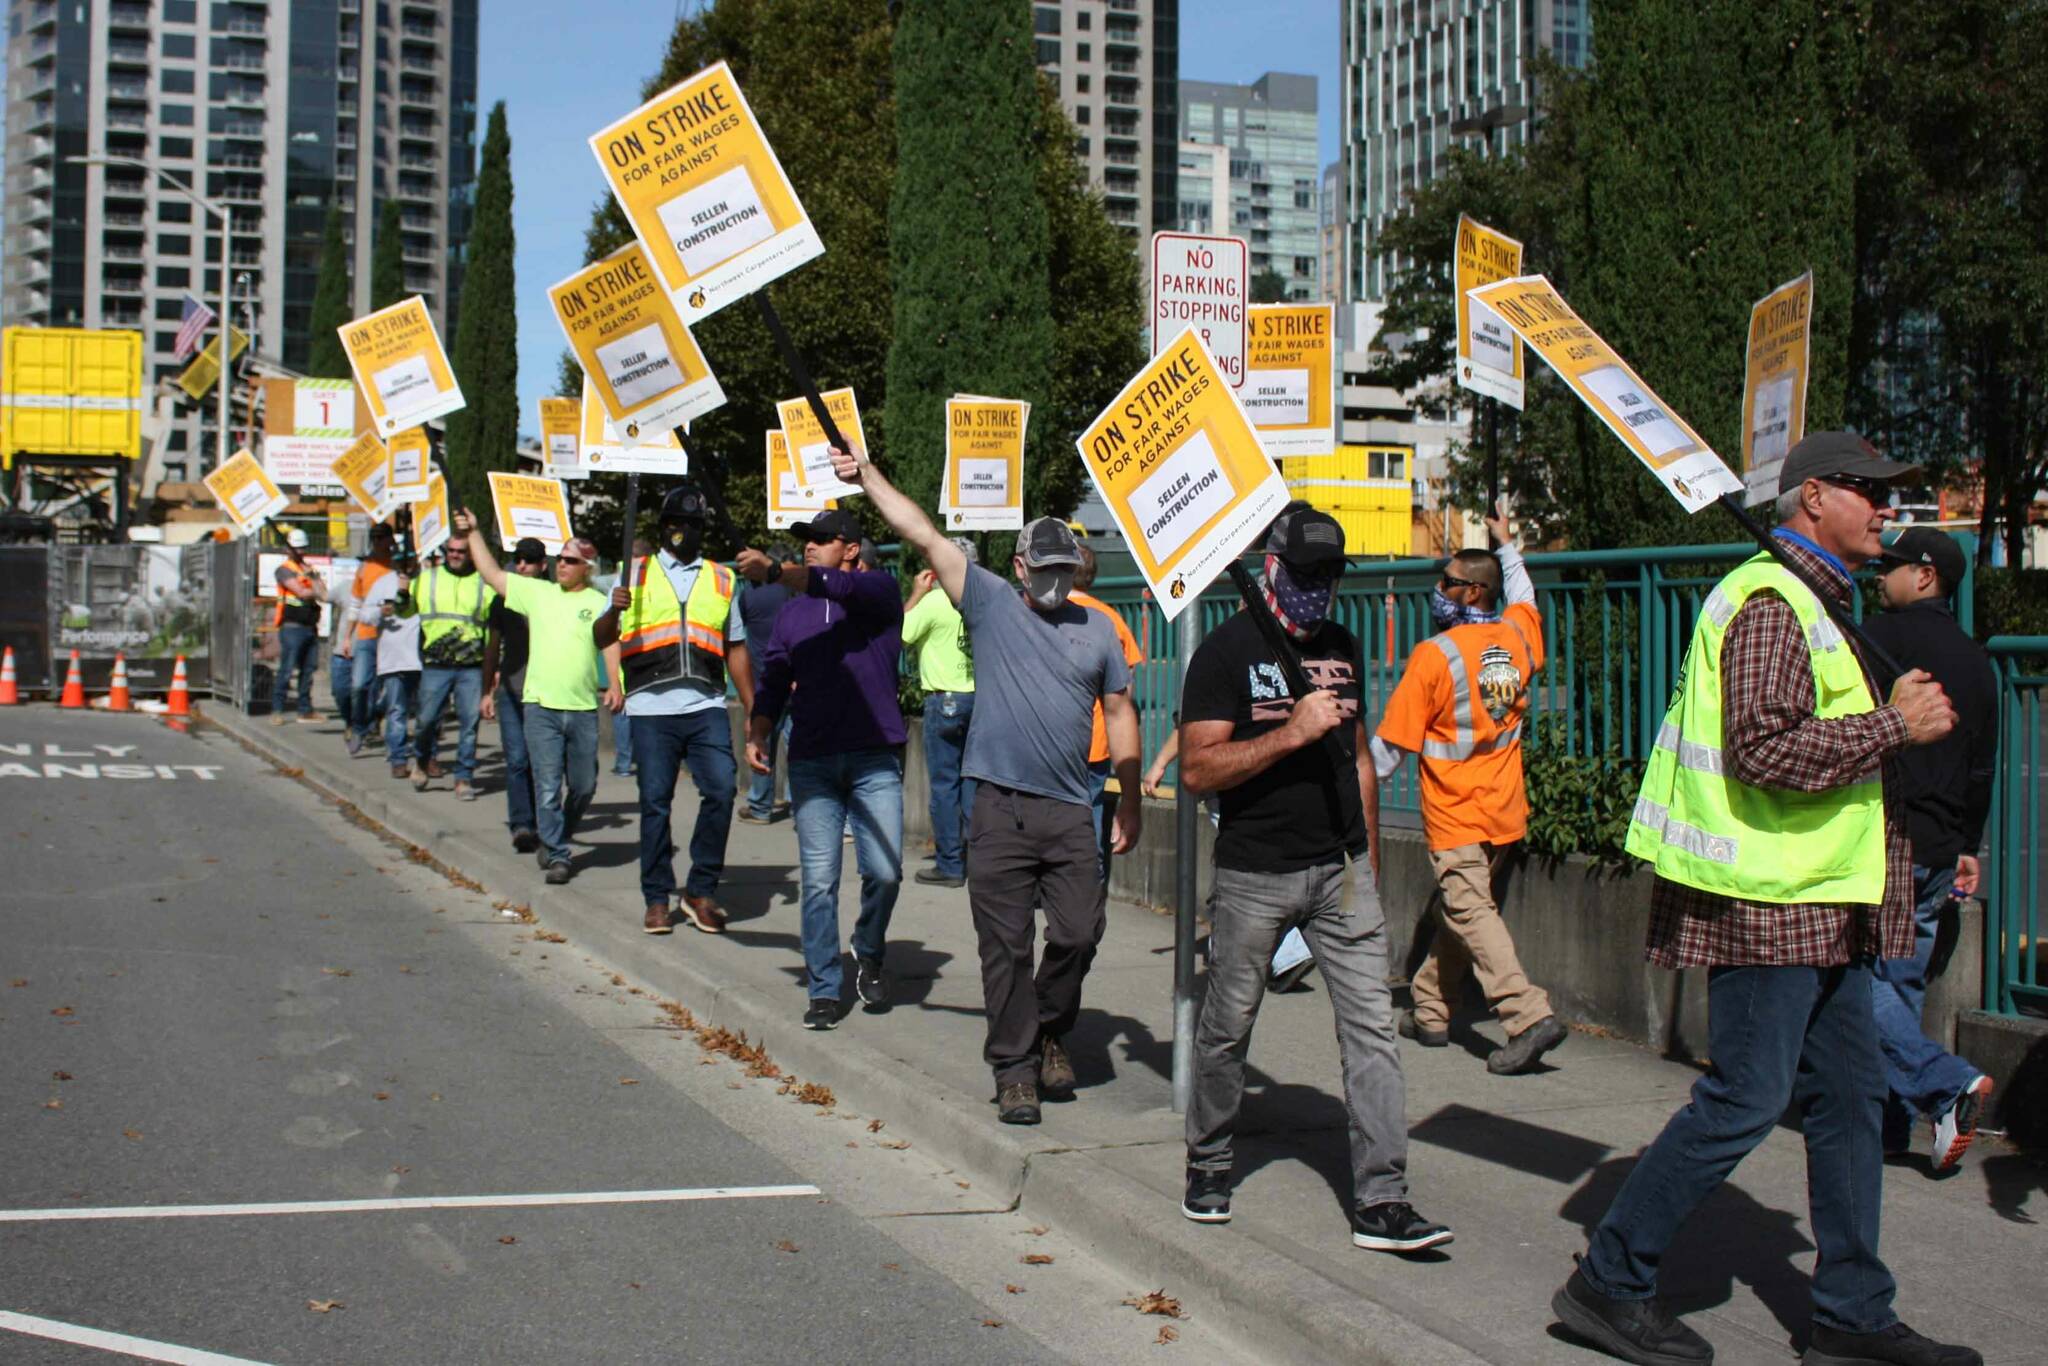 Carpenters union members peacefully strike on Sept. 16 in downtown Bellevue (photo by Cameron Sheppard)